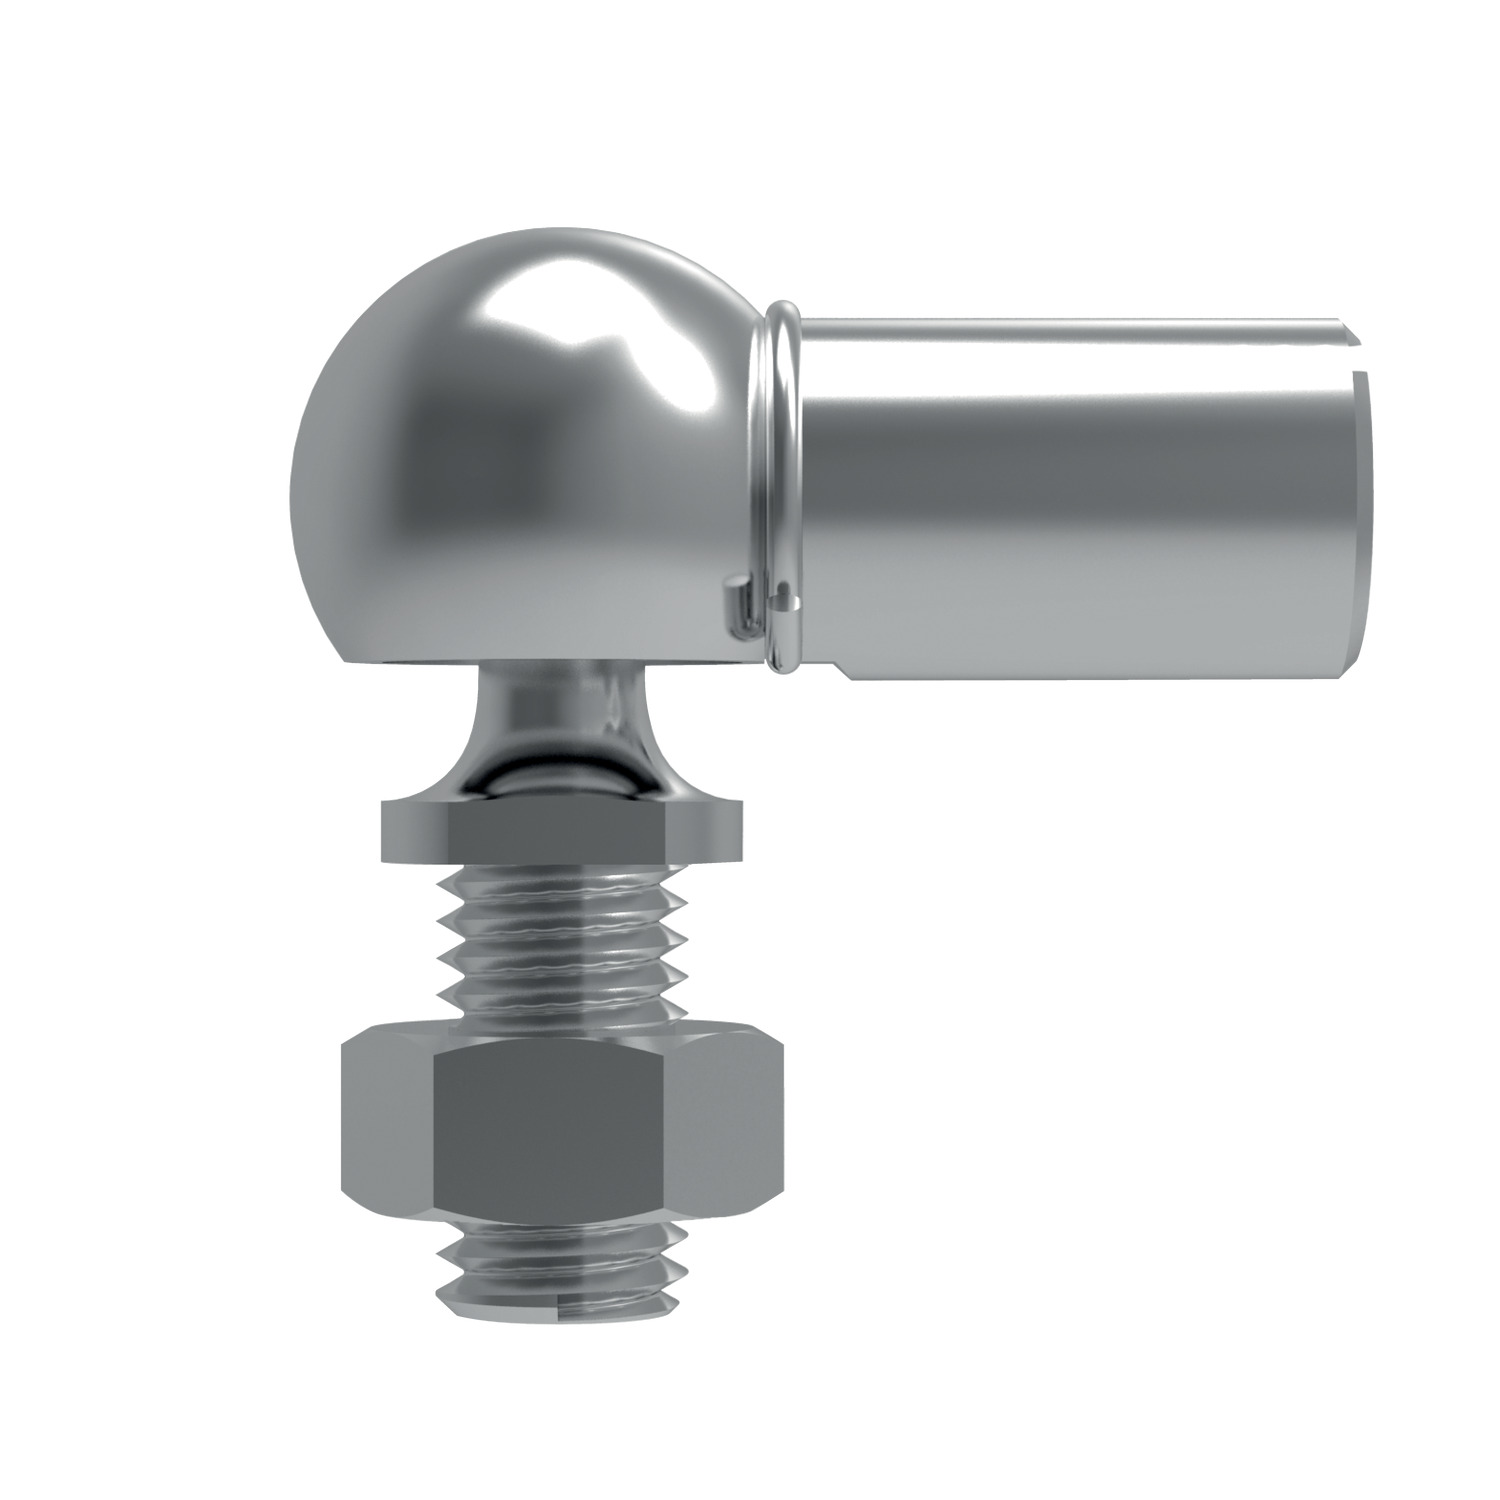 R3466 - Stainless Ball and Socket Joints